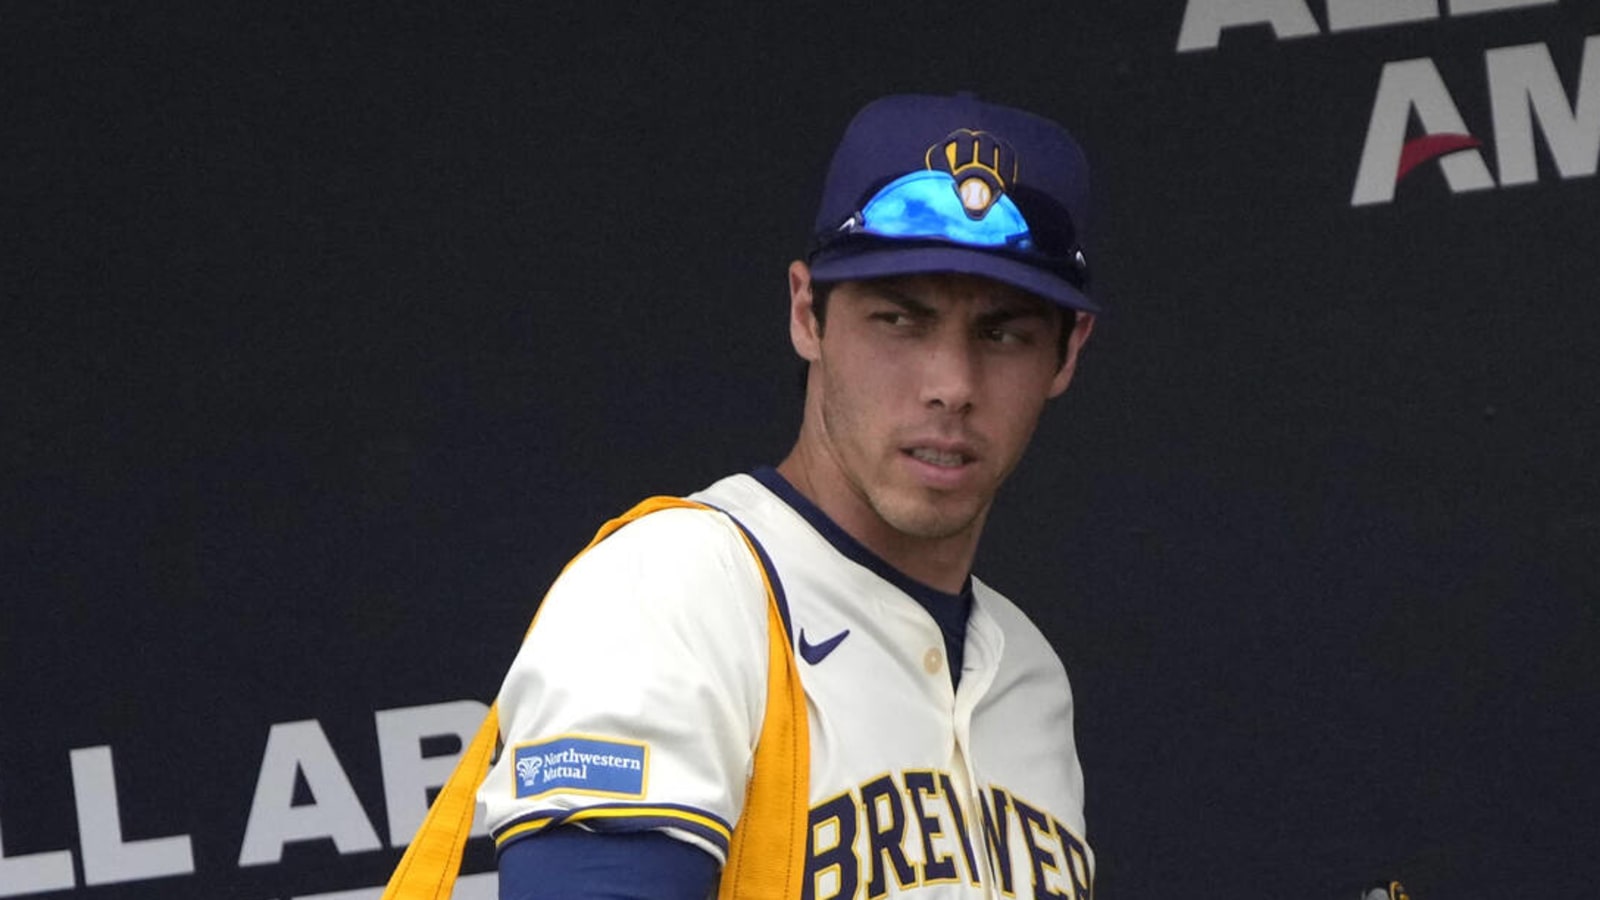 Brewers place Christian Yelich on 10-day IL due to back strain